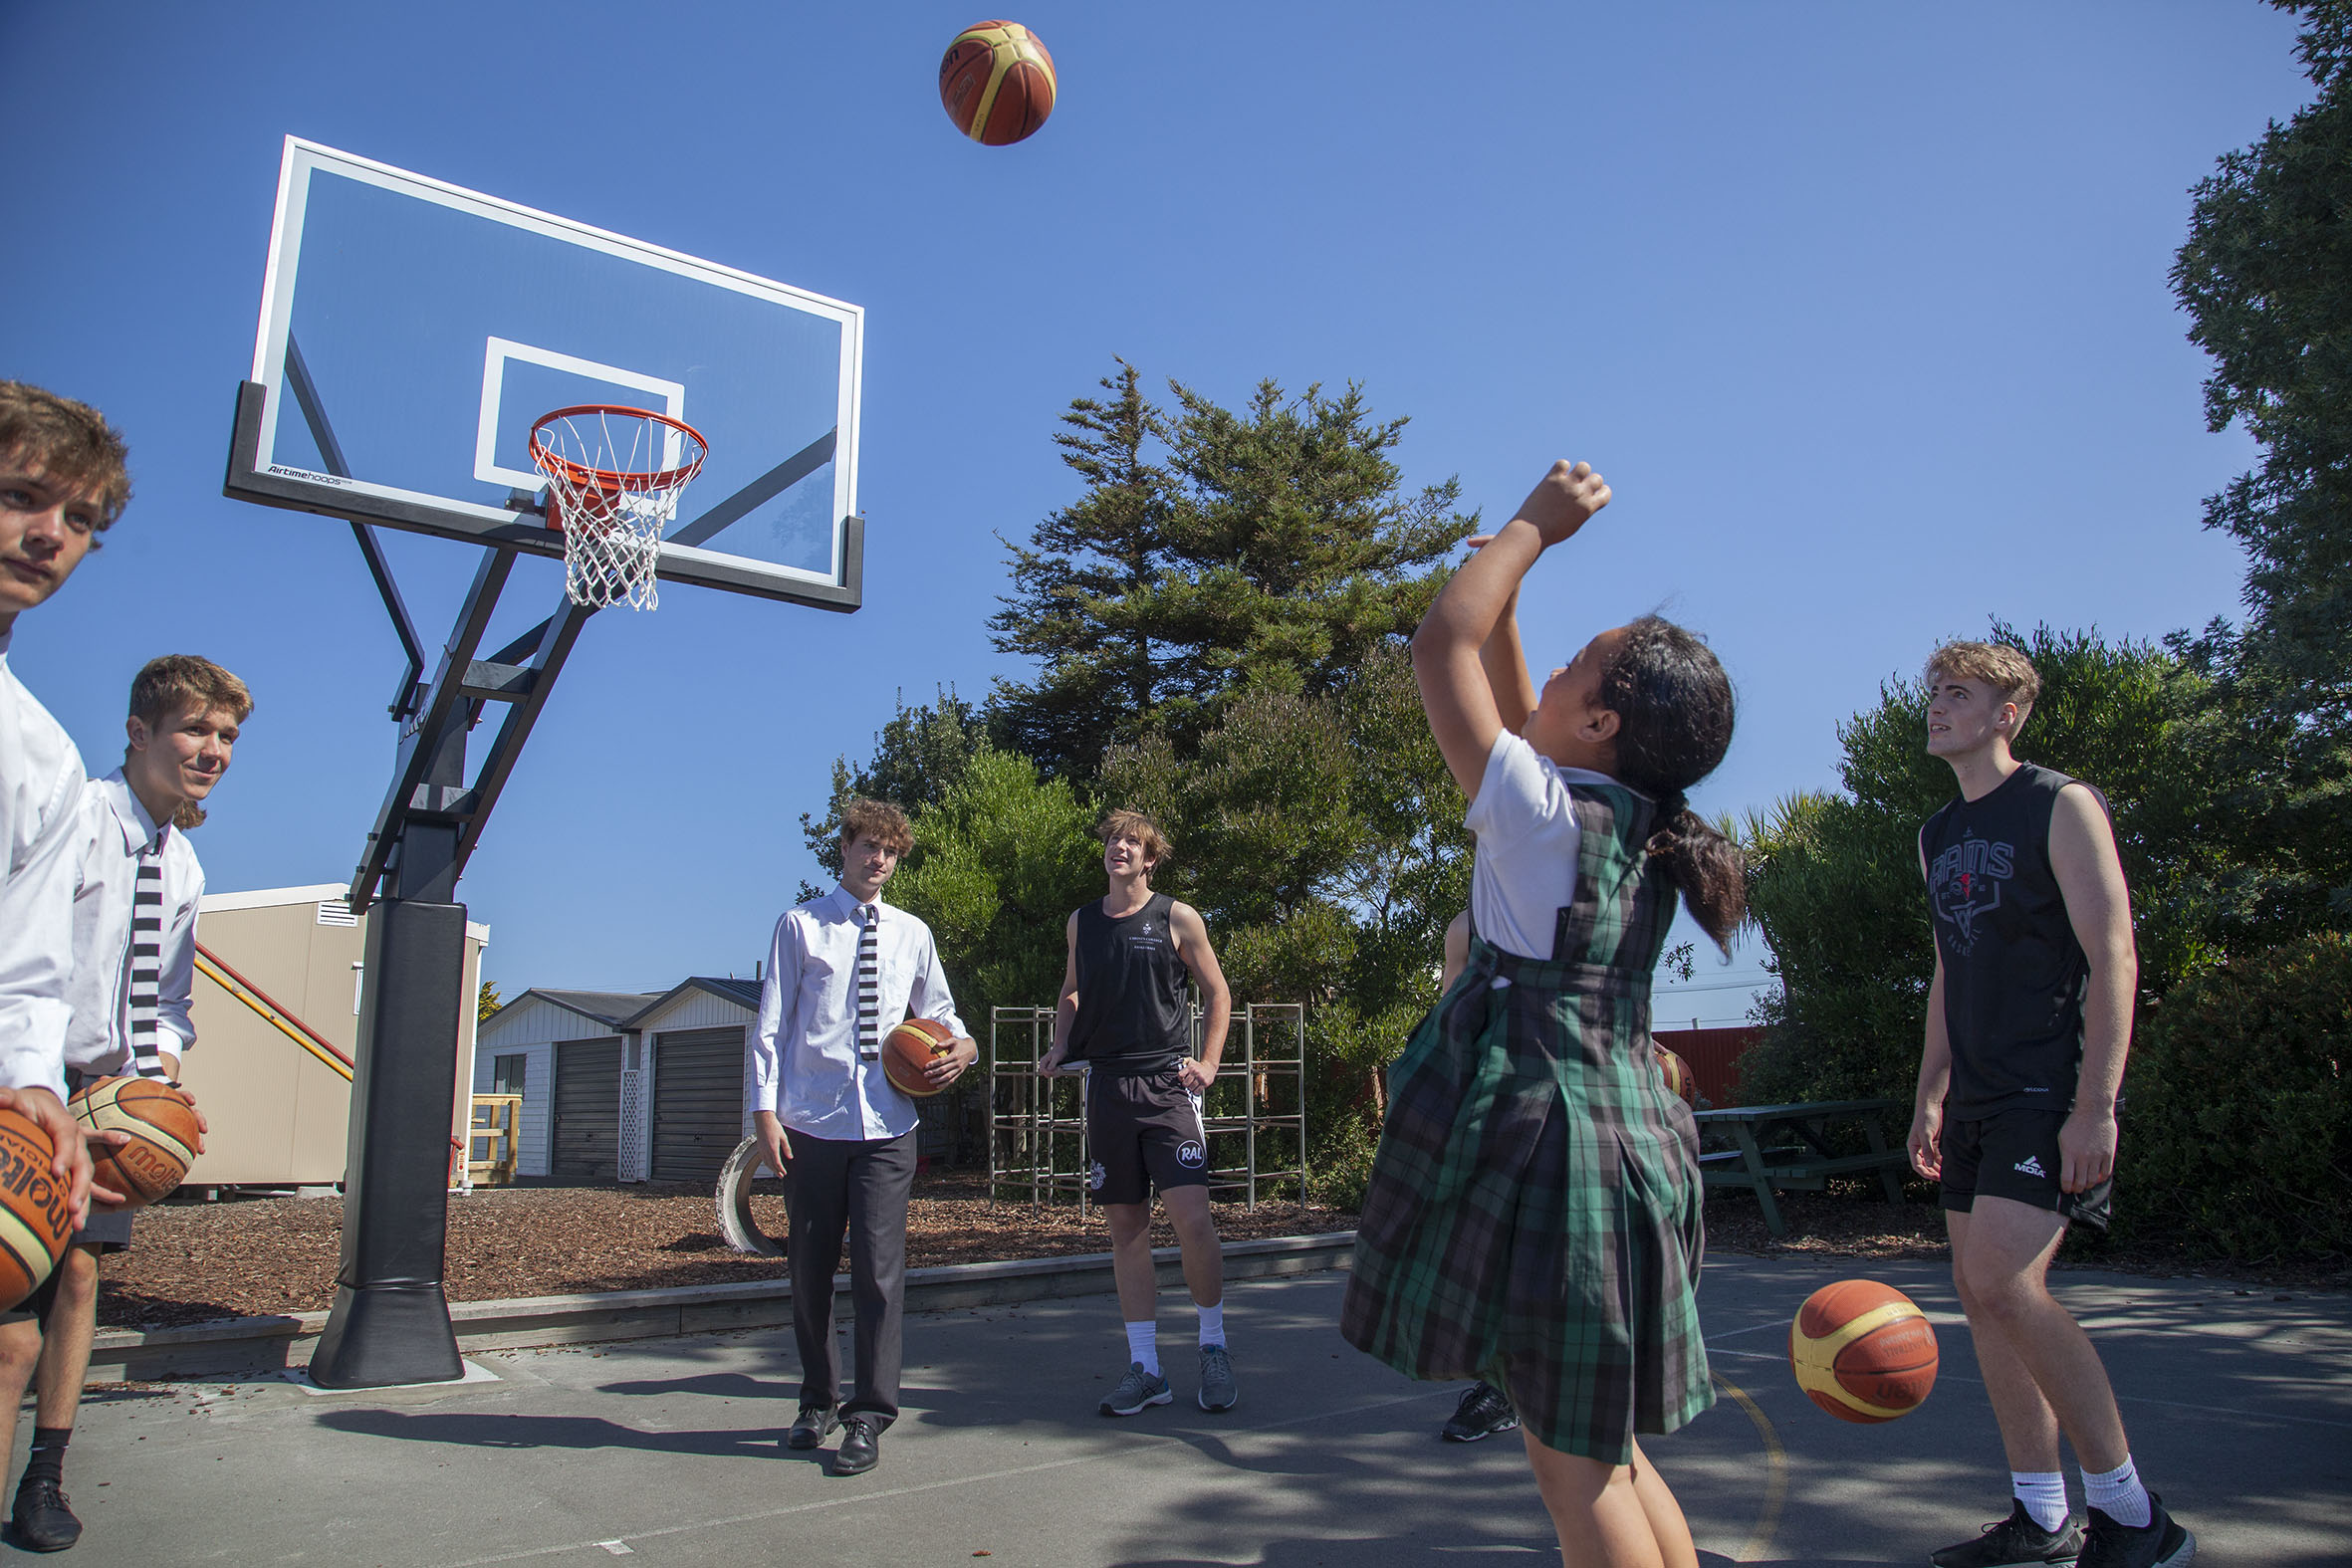 Christ's College senior A basketball players use the new basketball hoops with St James School...